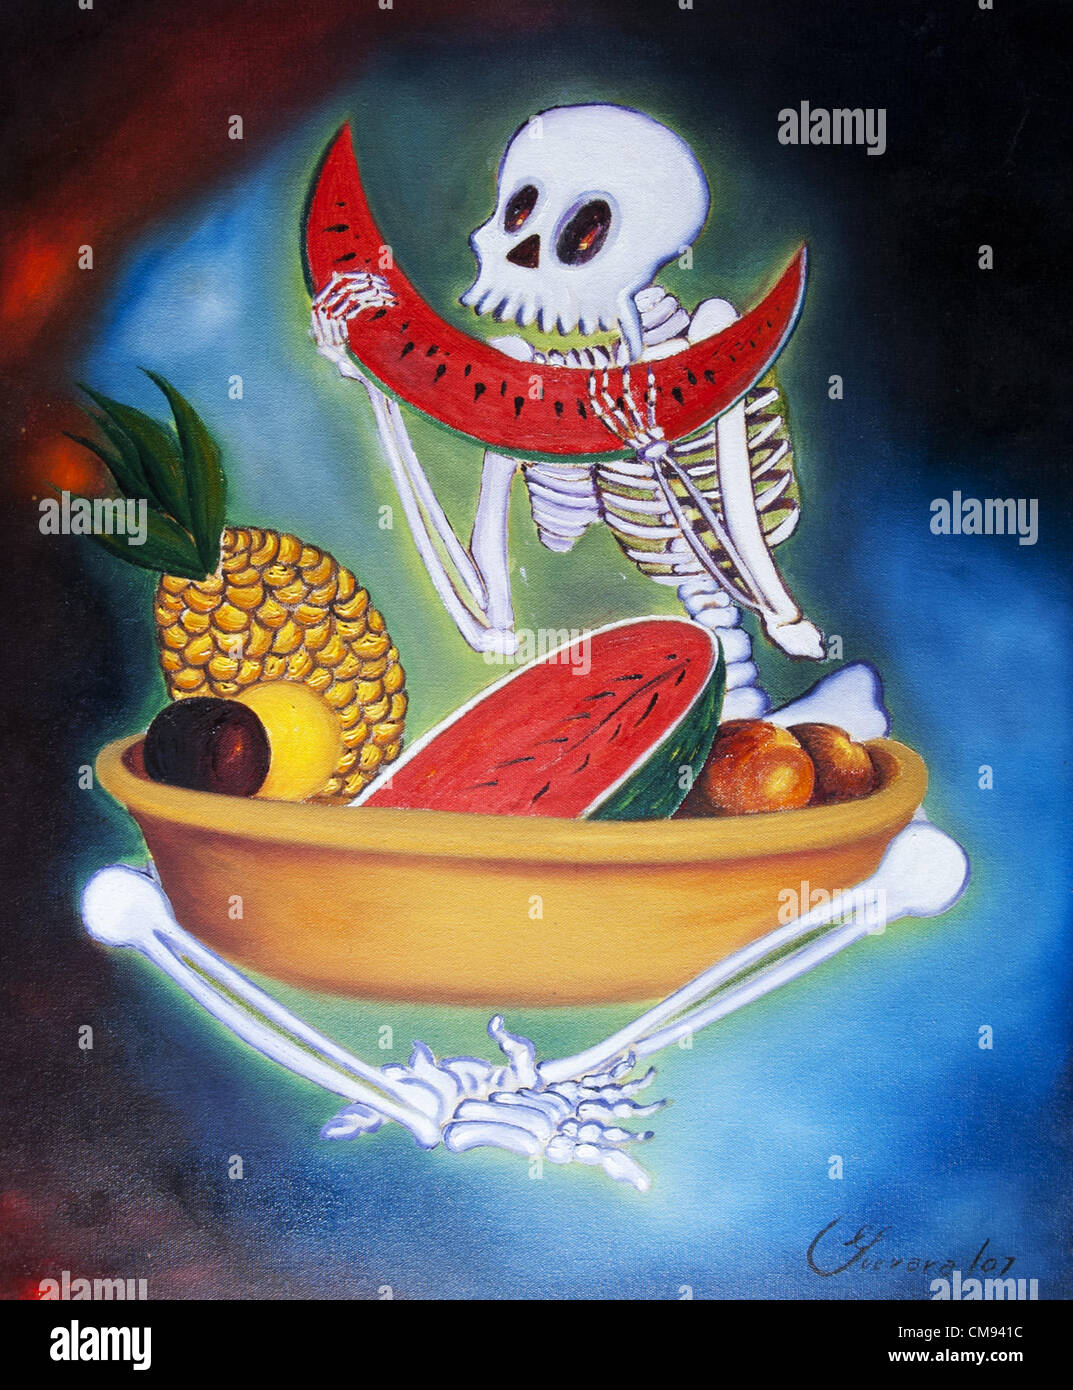 Oct. 31, 2012 - San Juan Capistrano, California, USA - Artist ART GUEVARA'S Day of the Dead oil painting, 20X24, entitled ''La Ultima Cena (Last Supper.)  The colors of the watermelon, red, white and green are meant to symbolize the Mexican Flag. Mexican artist ART GUEVARA, 63, of San Juan Capistrano, California, has created an artwork series celebrating All Saints Day, also known as Dia De Los Muertos in Mexico and other Latin American Countries. Mexican and other Latin American countries traditionally celebrate the holiday by visiting the grave sites of loved ones. Stock Photo